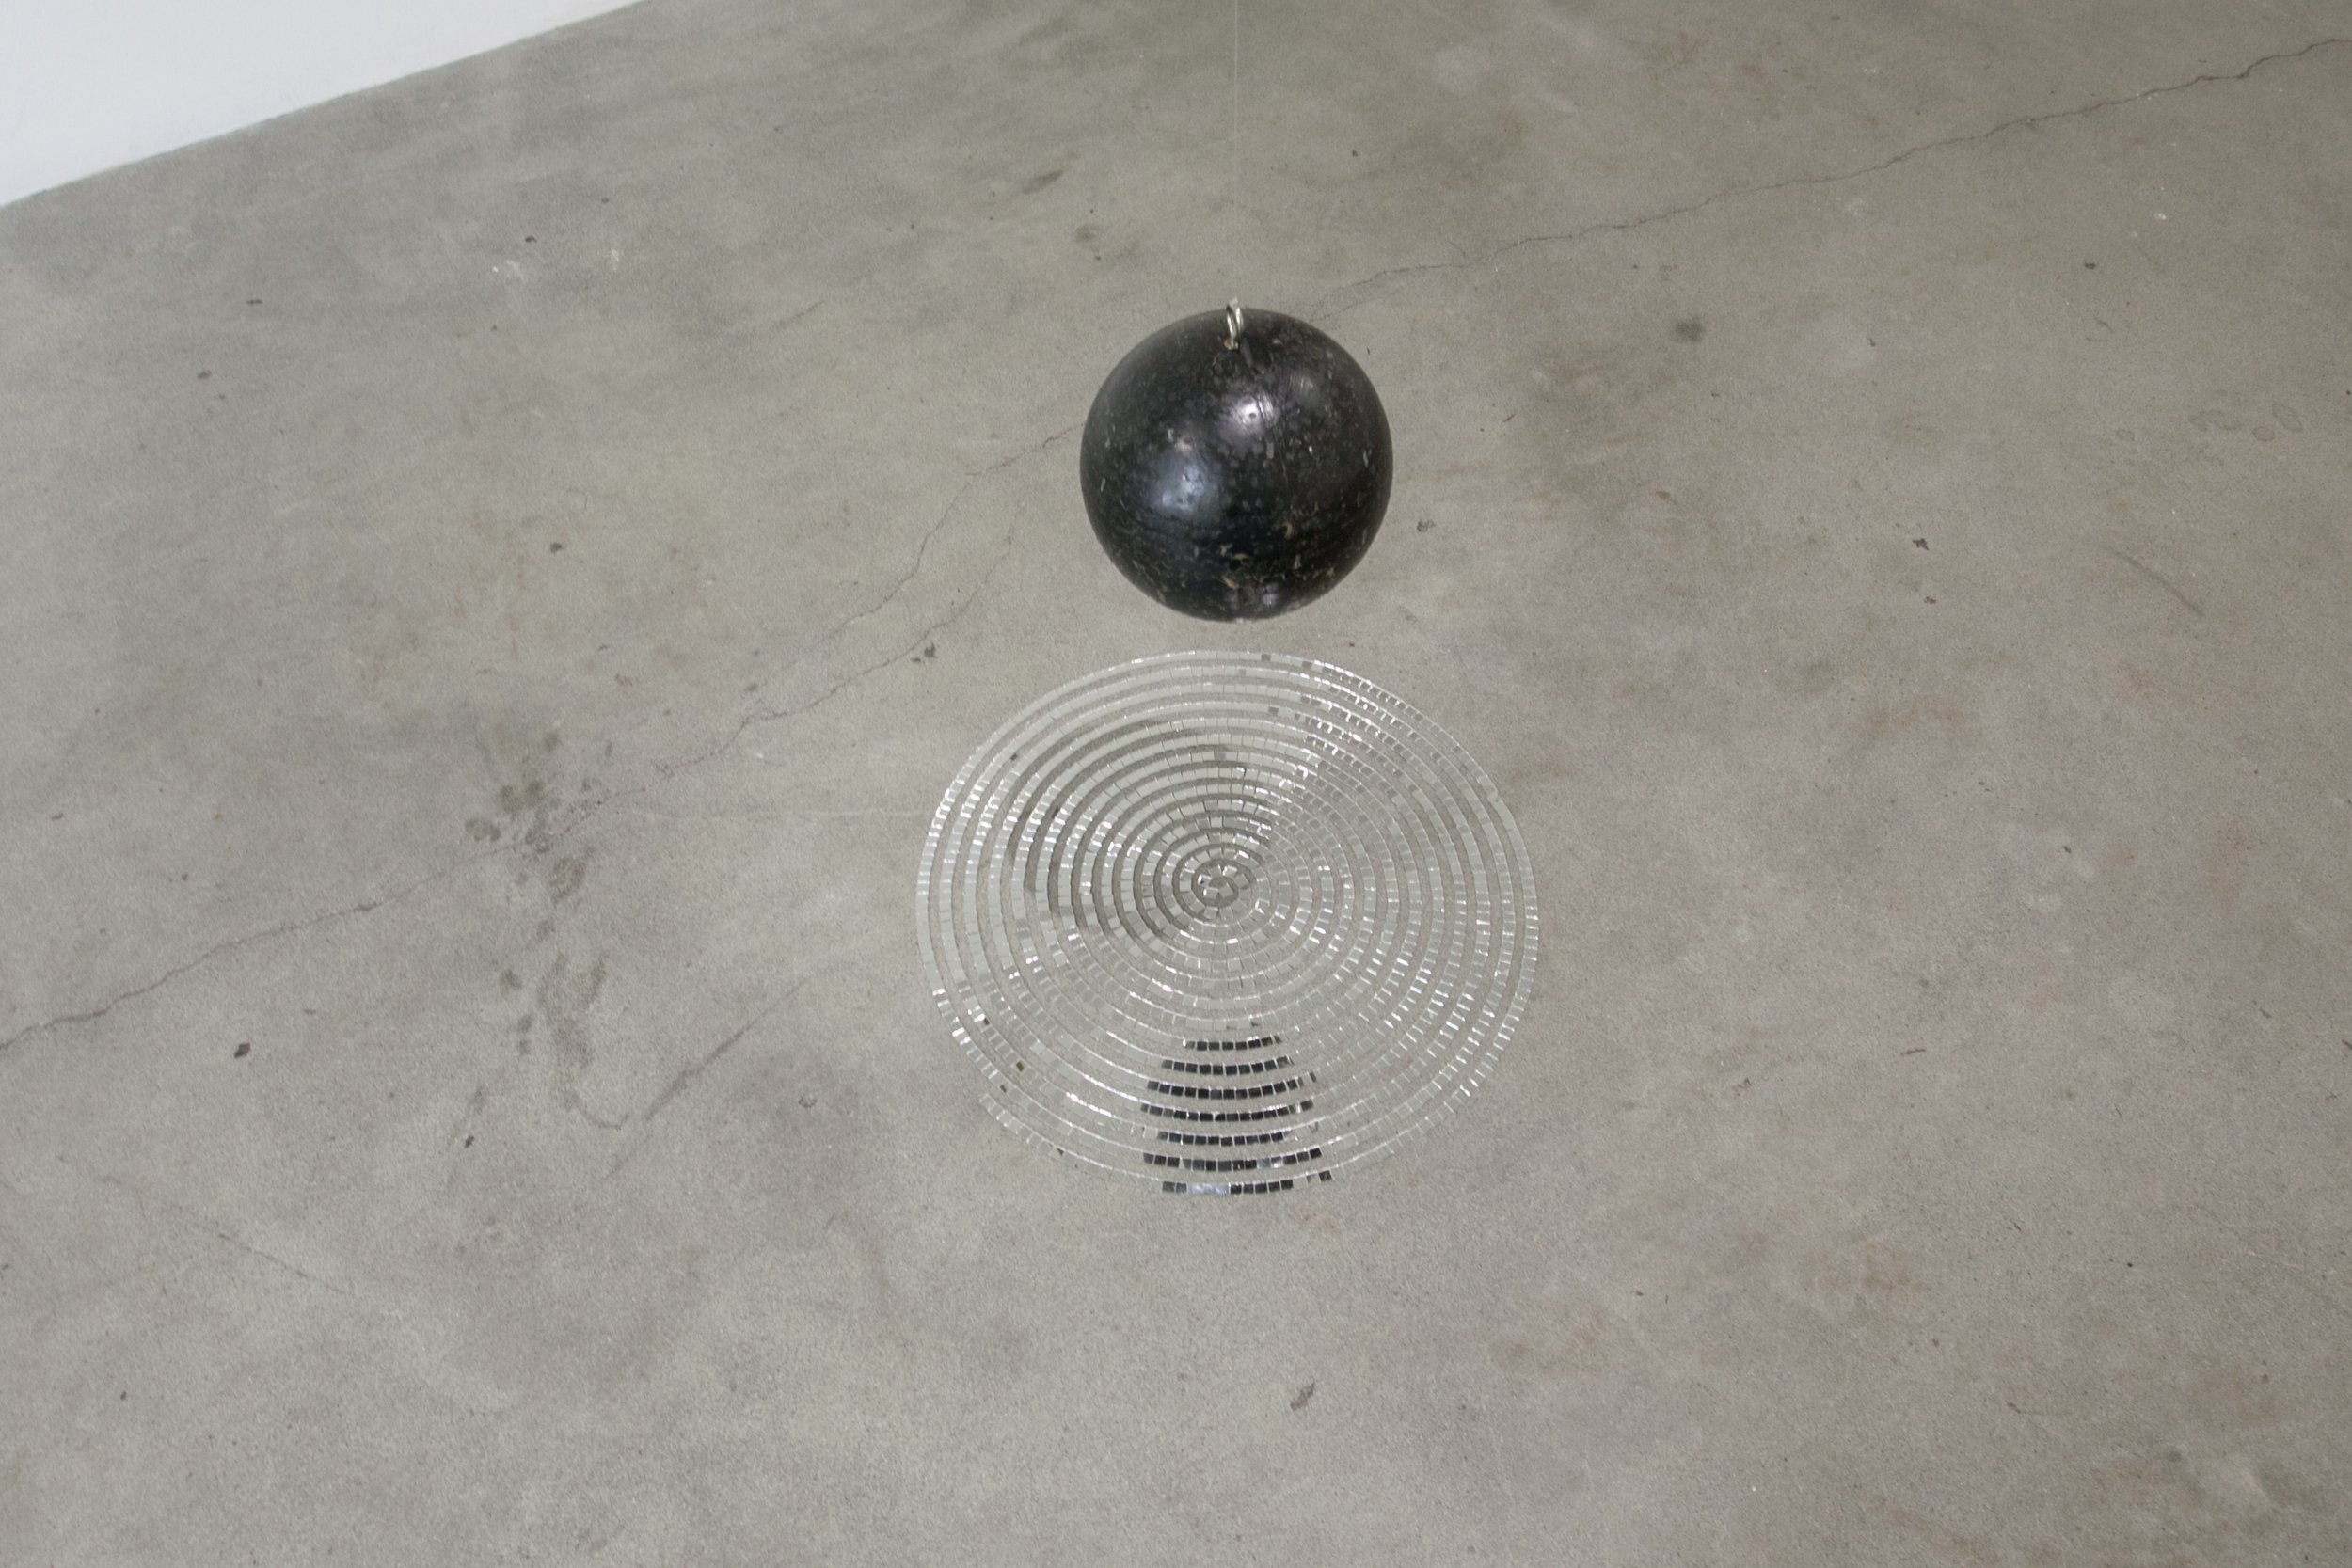 My Boring Patterns Rippled and Stared Back, 14" x 14" x 16", Dismantled Disco Ball, 2015